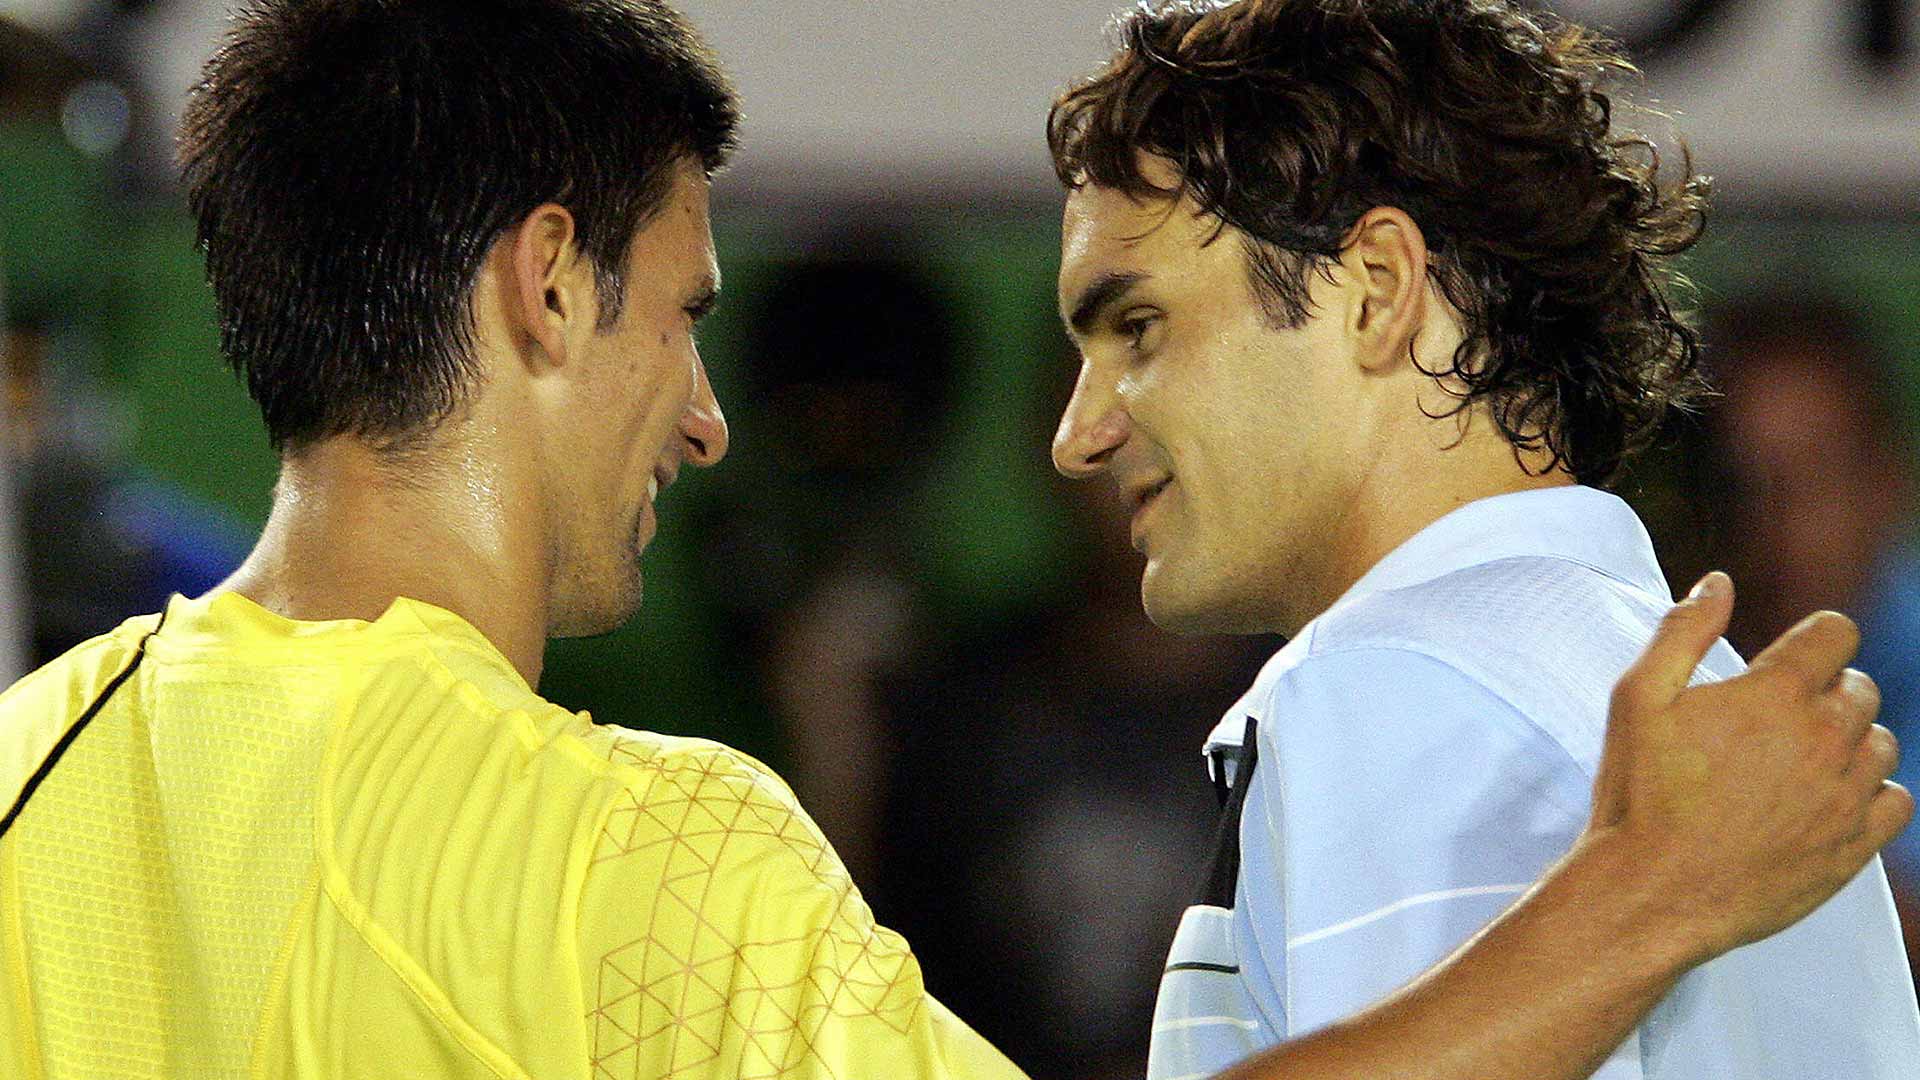 Novak Djokovic and Roger Federer meet for the first time in Grand Slam action in the fourth round of the 2007 Australian Open.